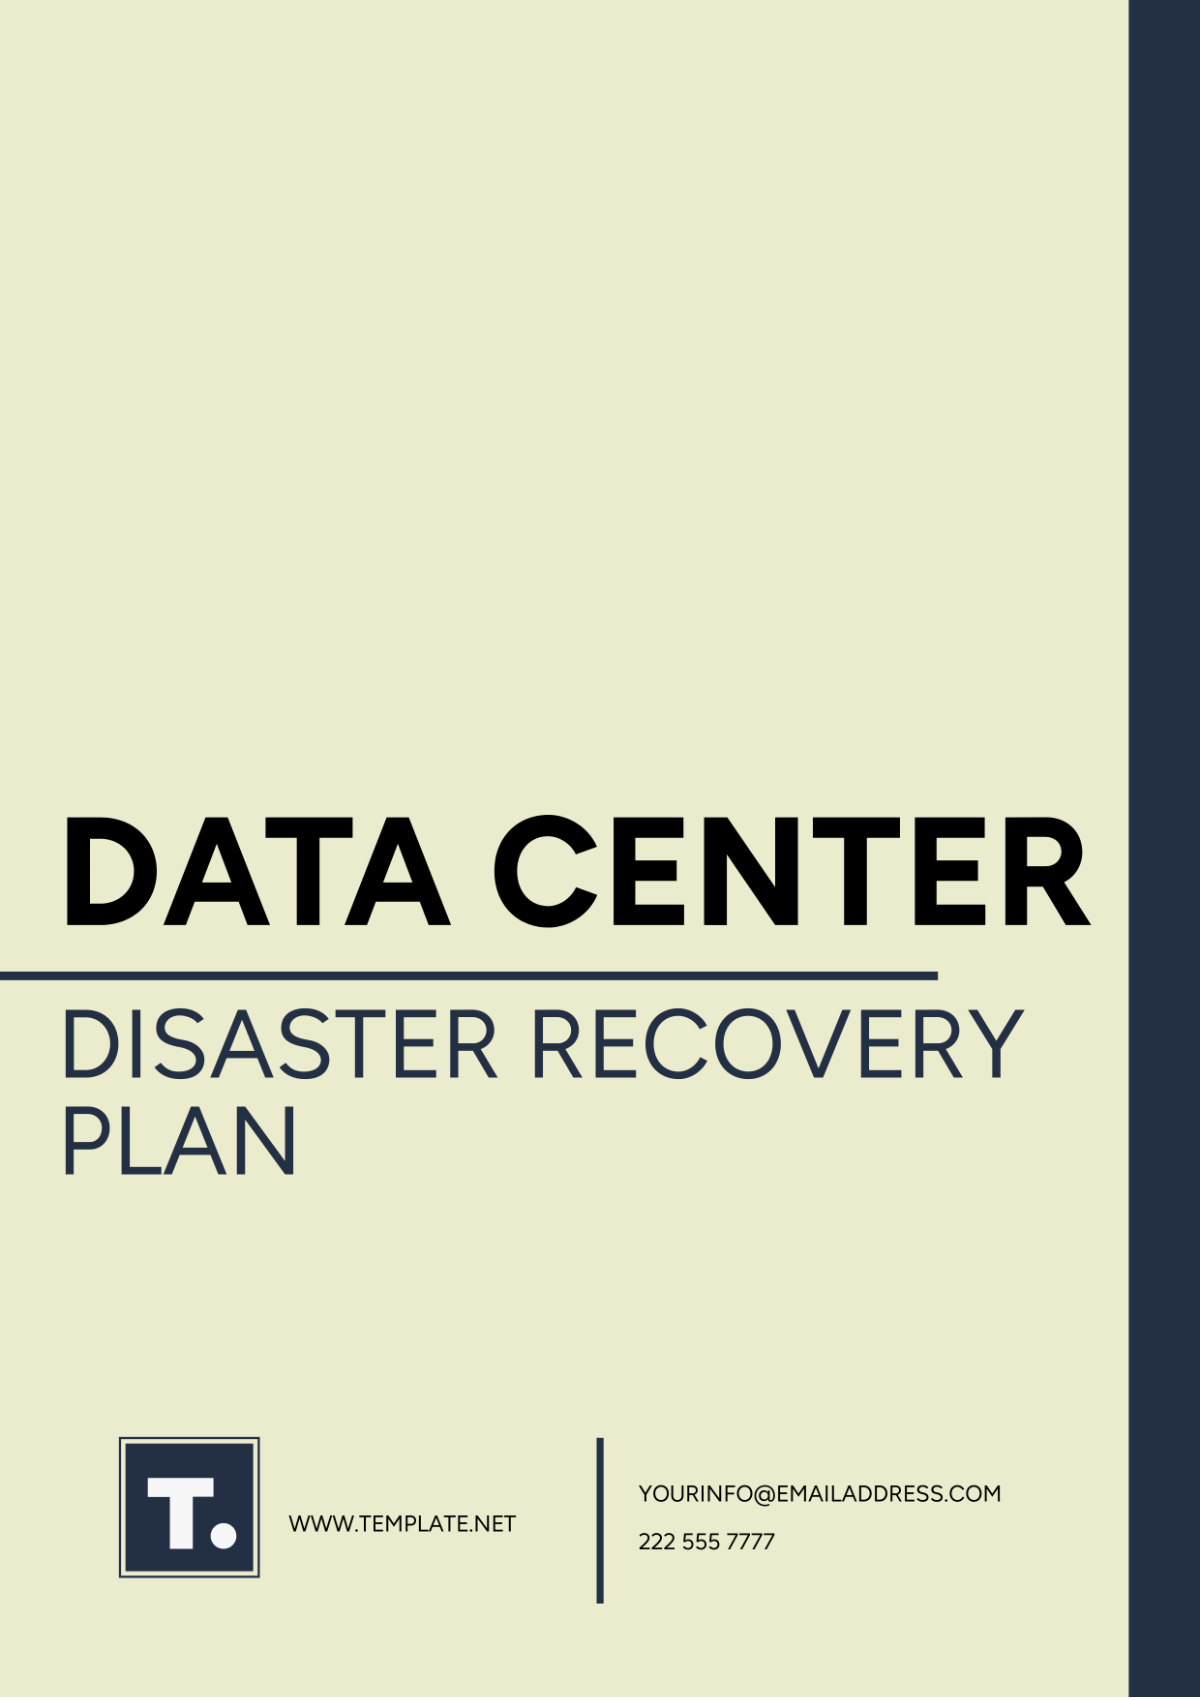 Free Data Center Disaster Recovery Plan Template